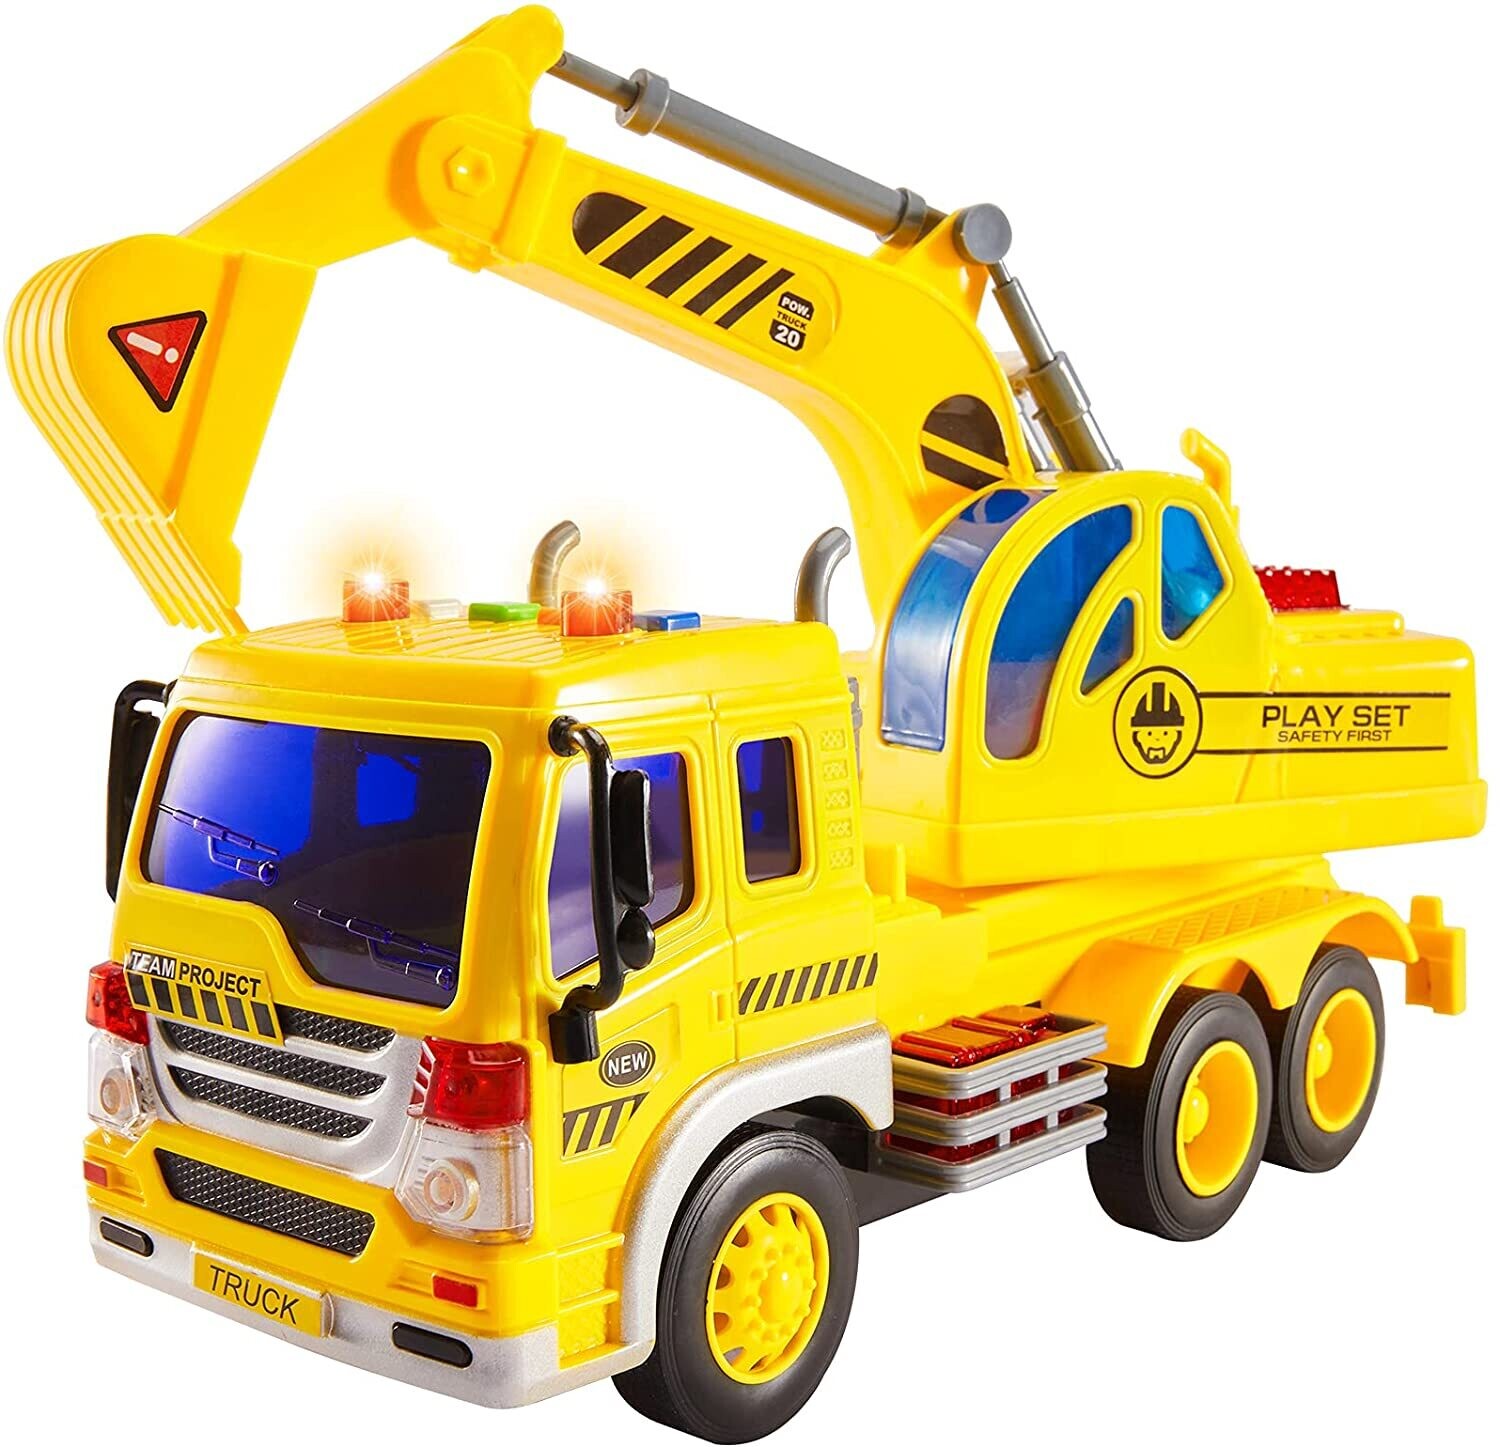 Kids Toy Digger, Truck & Lorry